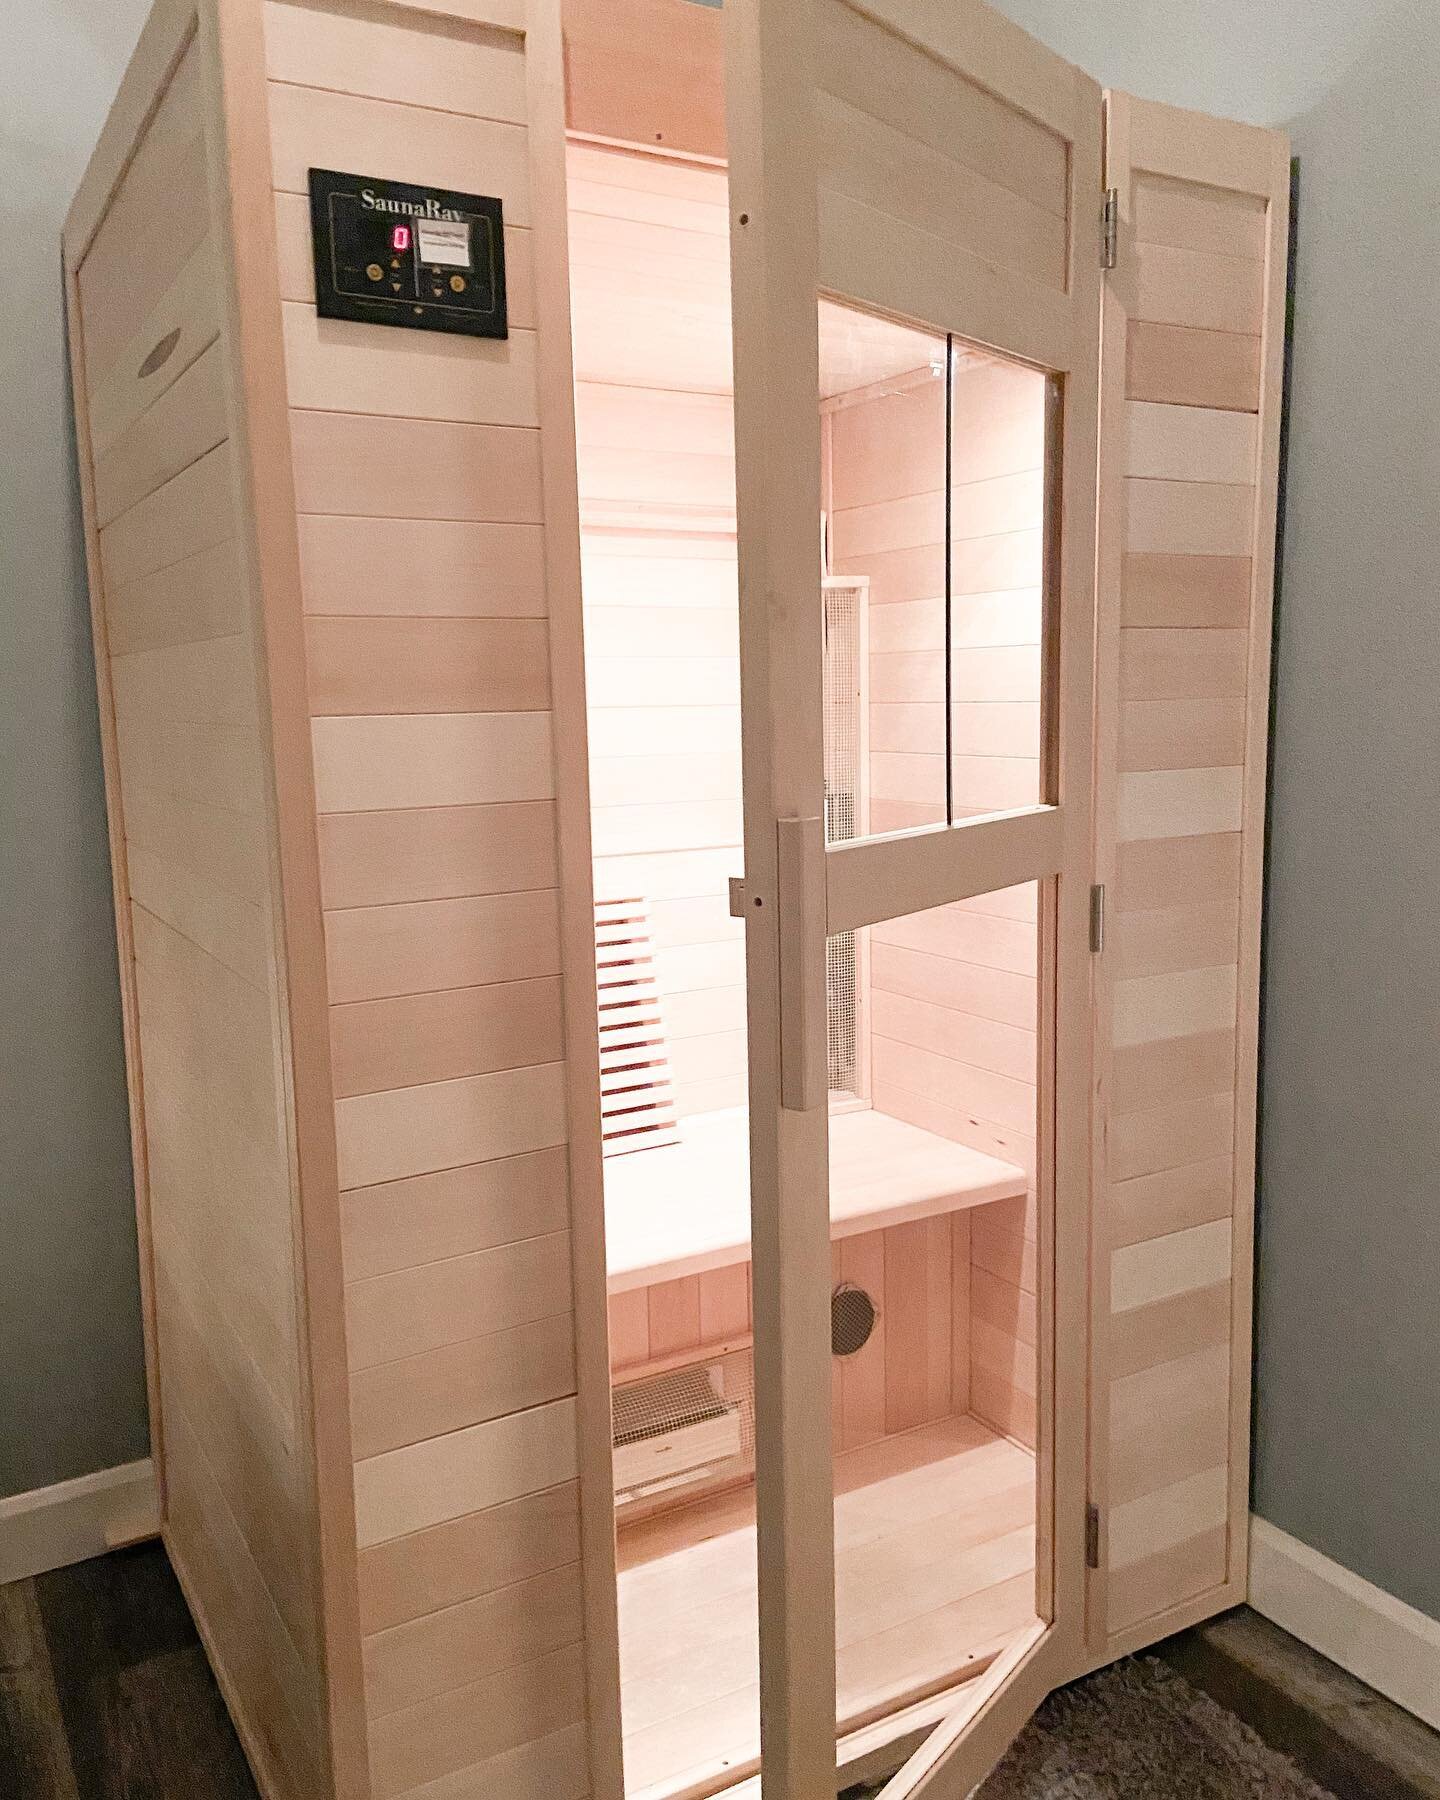 𝐖𝐞𝐥𝐥𝐧𝐞𝐬𝐬 𝐖𝐞𝐝𝐧𝐞𝐬𝐝𝐚𝐲- Keeping our immune system healthy should always be a priority, regardless of the time of year. 

Did you know the use of an infrared sauna can be an incredible addition to immune health?

Here are 3 immune boostin